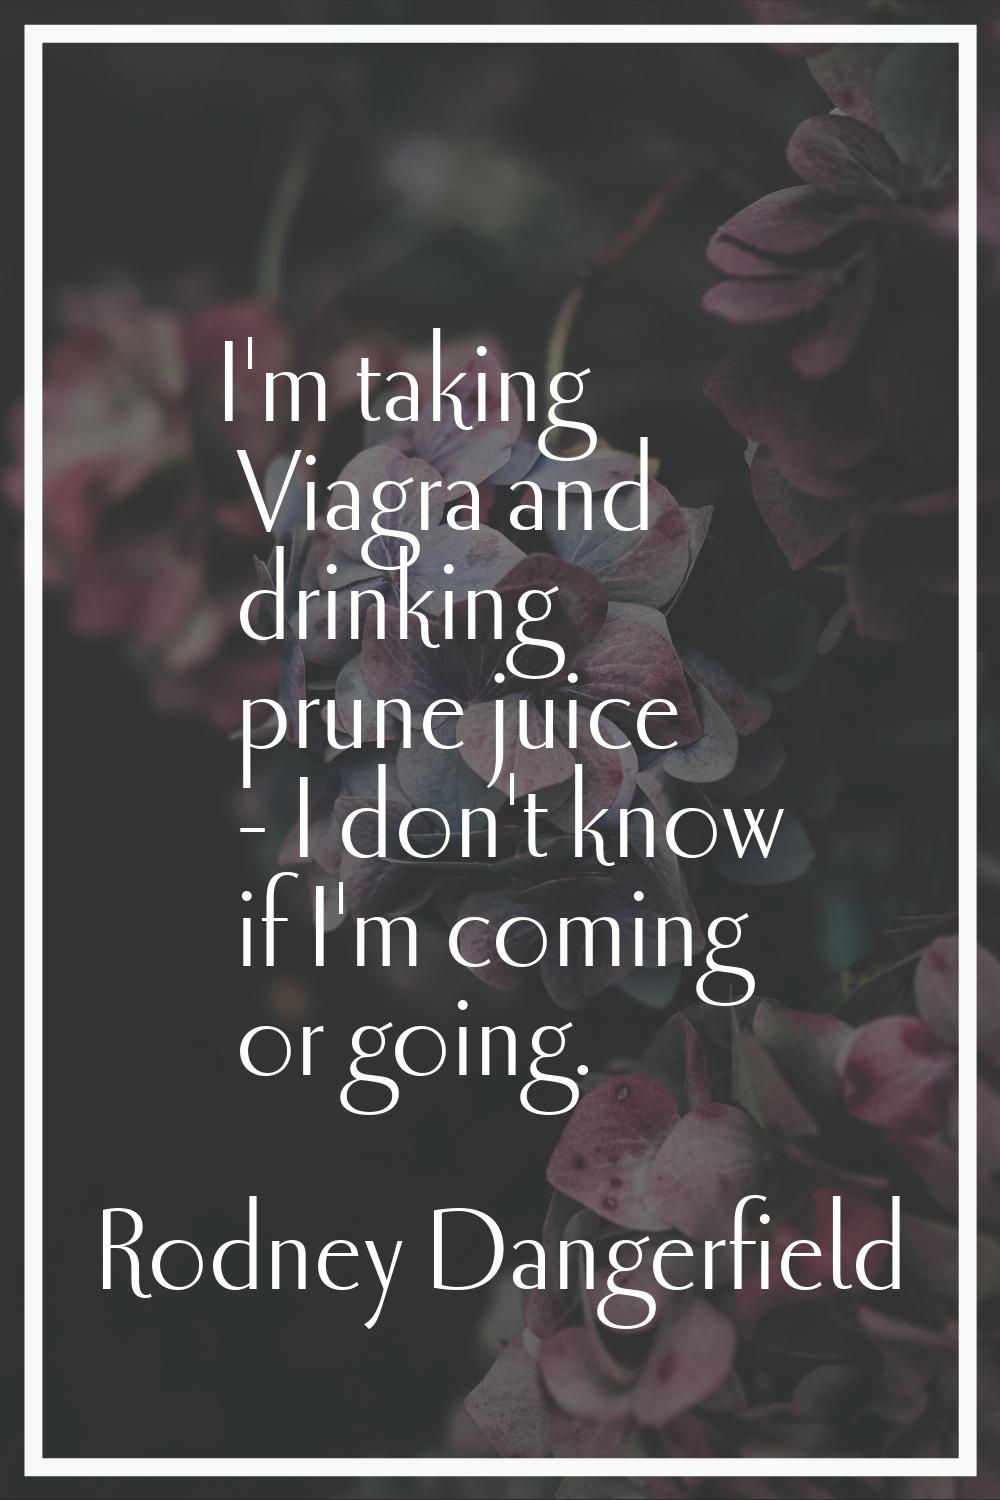 I'm taking Viagra and drinking prune juice - I don't know if I'm coming or going.